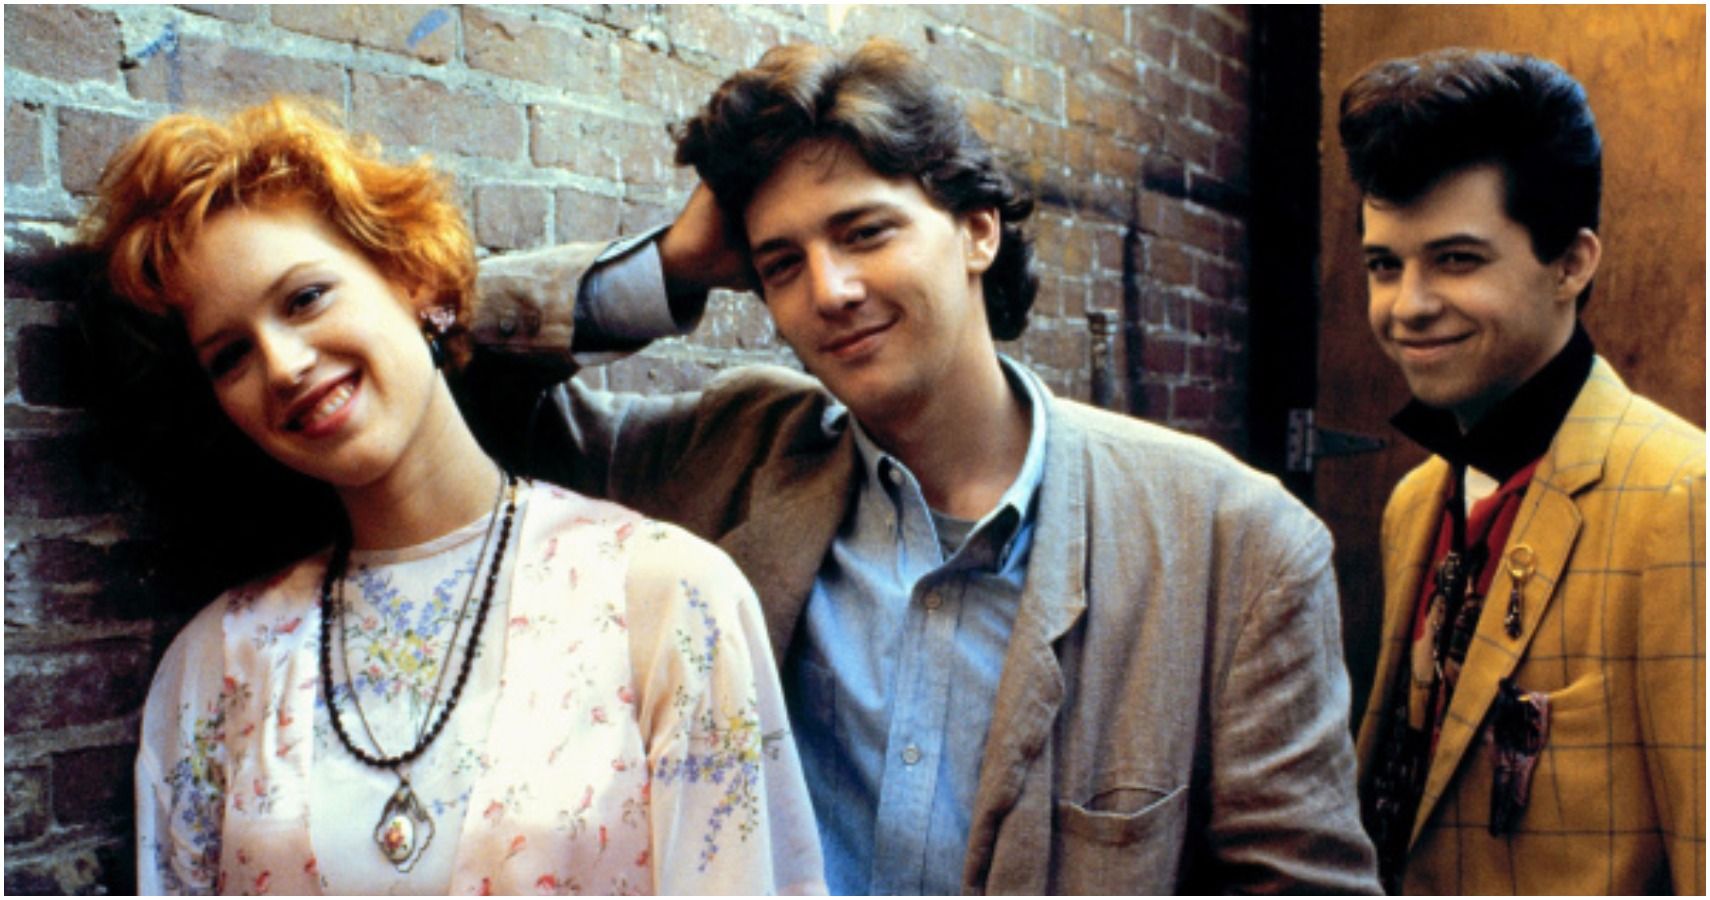 John Hughes’ 10 Best Movies Ranked by Rotten Tomatoes Score